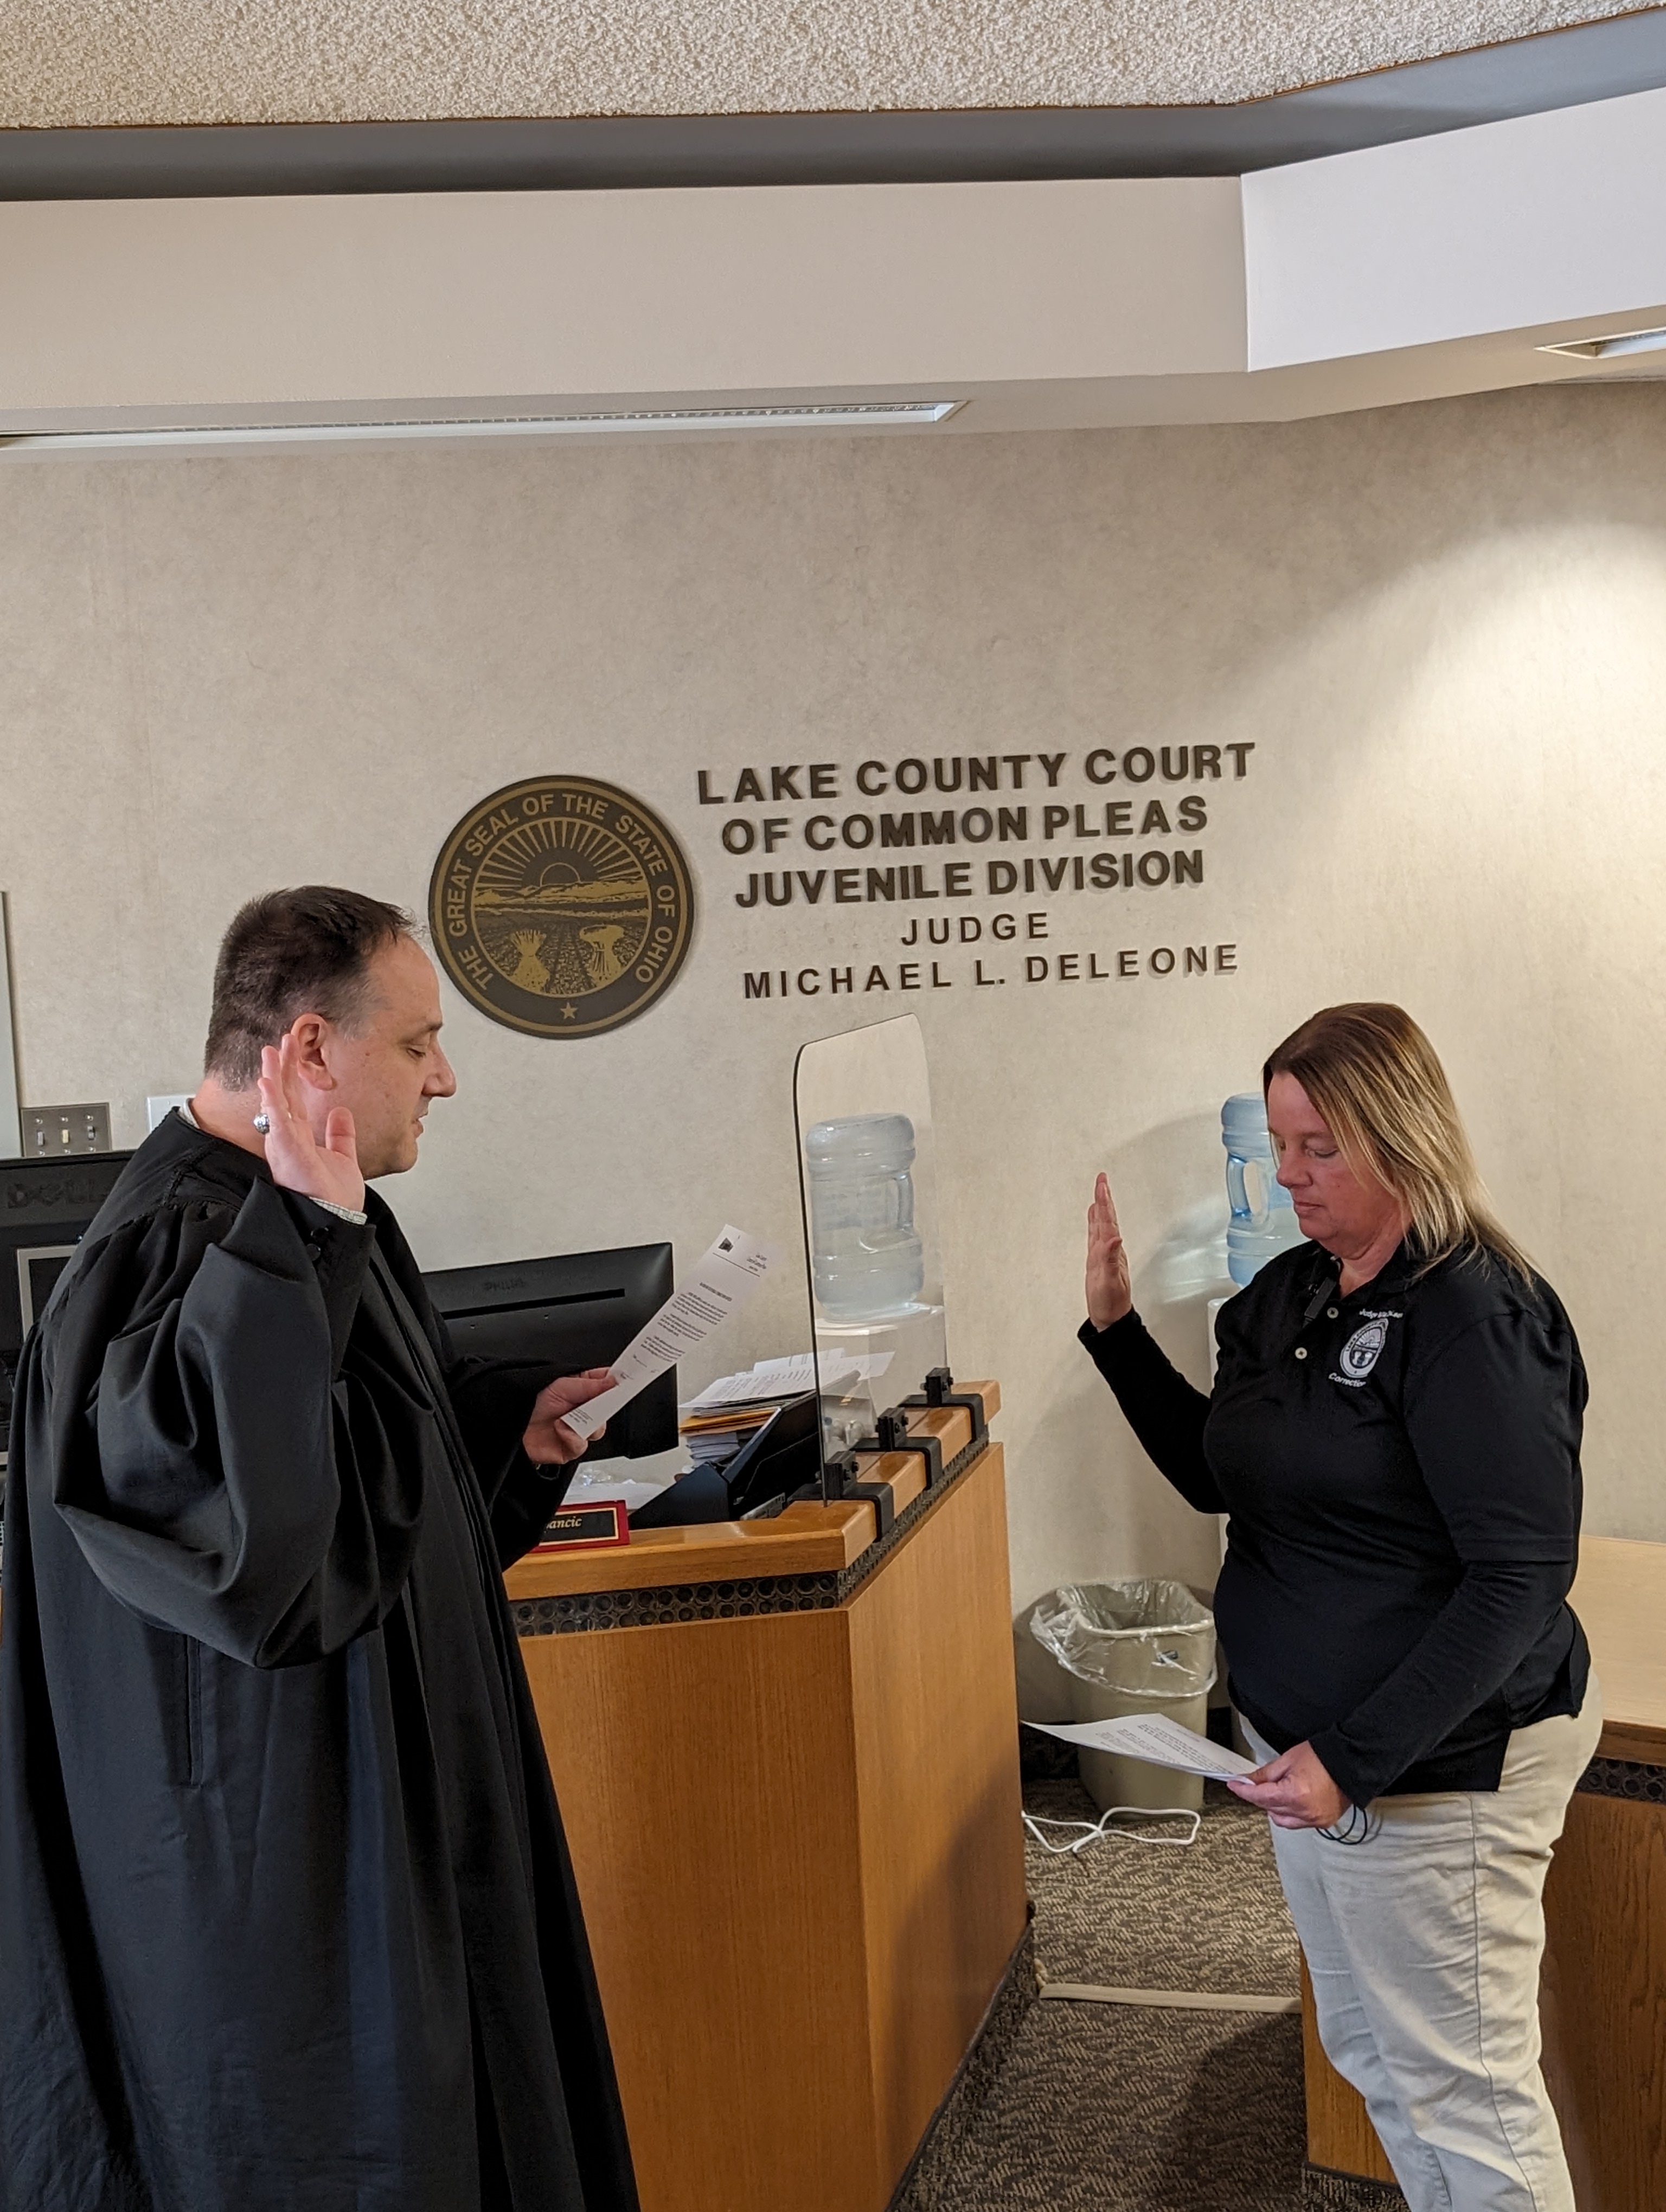 Judge DeLeone swearing in Sadie Mollard as a Juvenile Corrections Officer